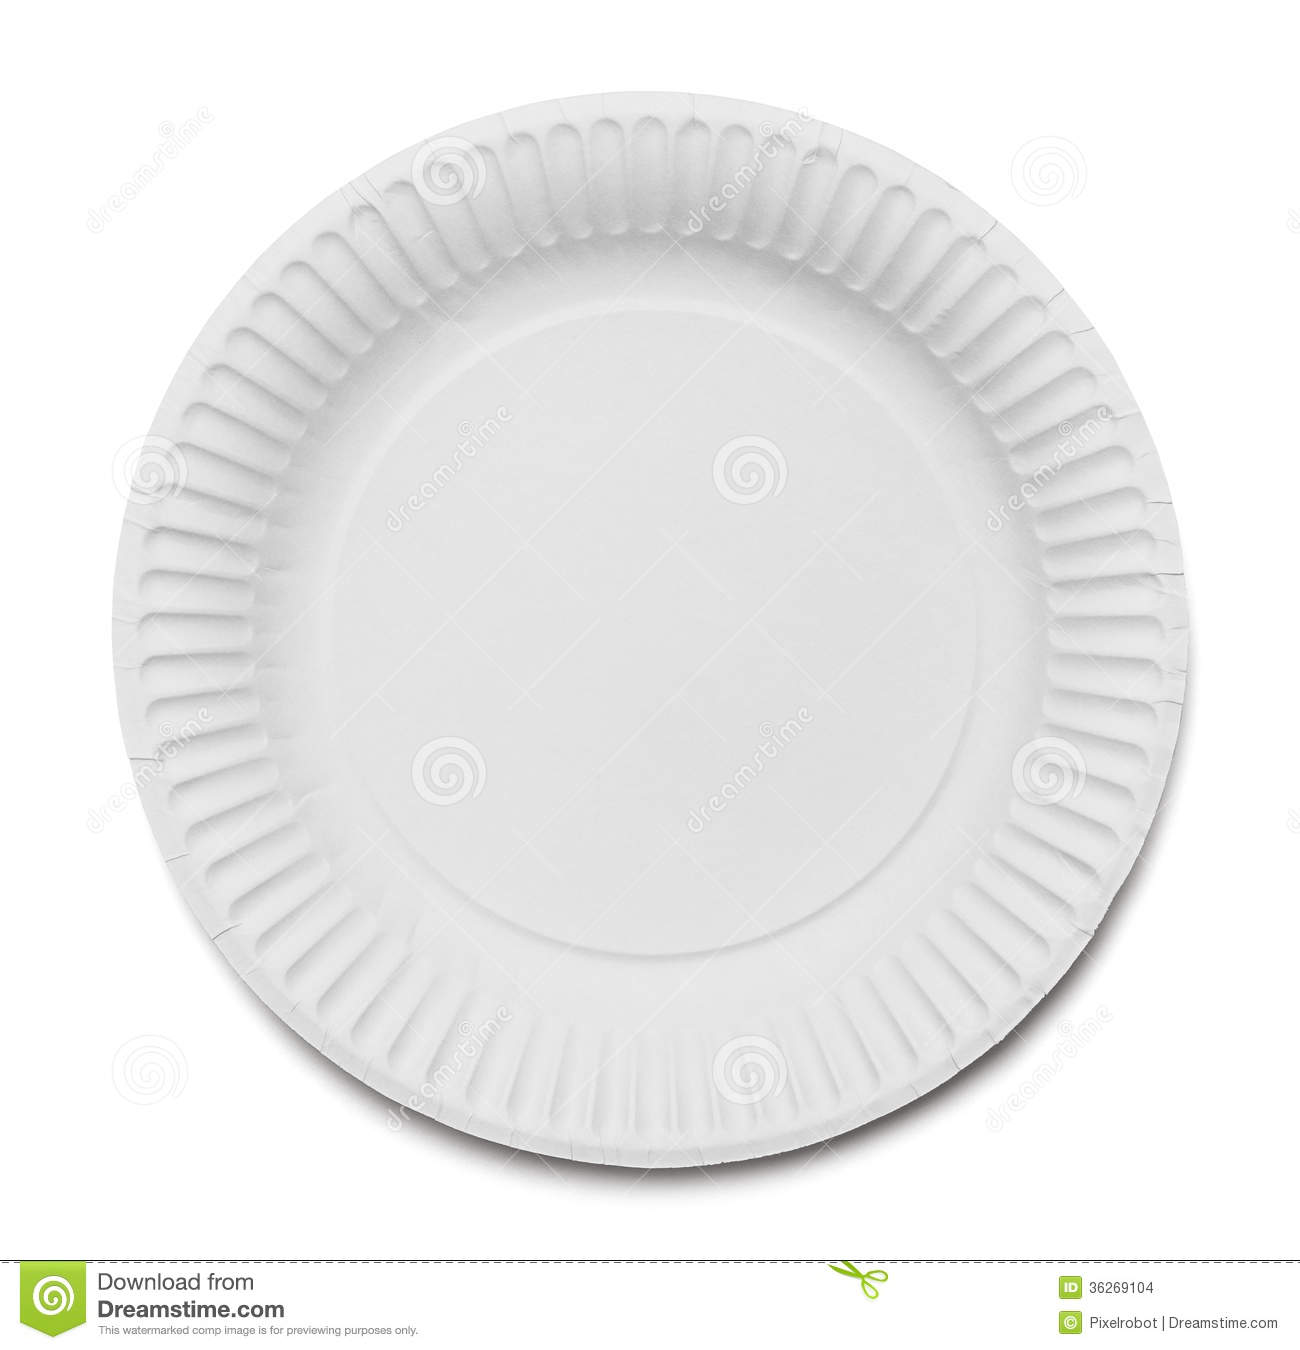 Generic Paper Plate Stock Images   Image  36269104